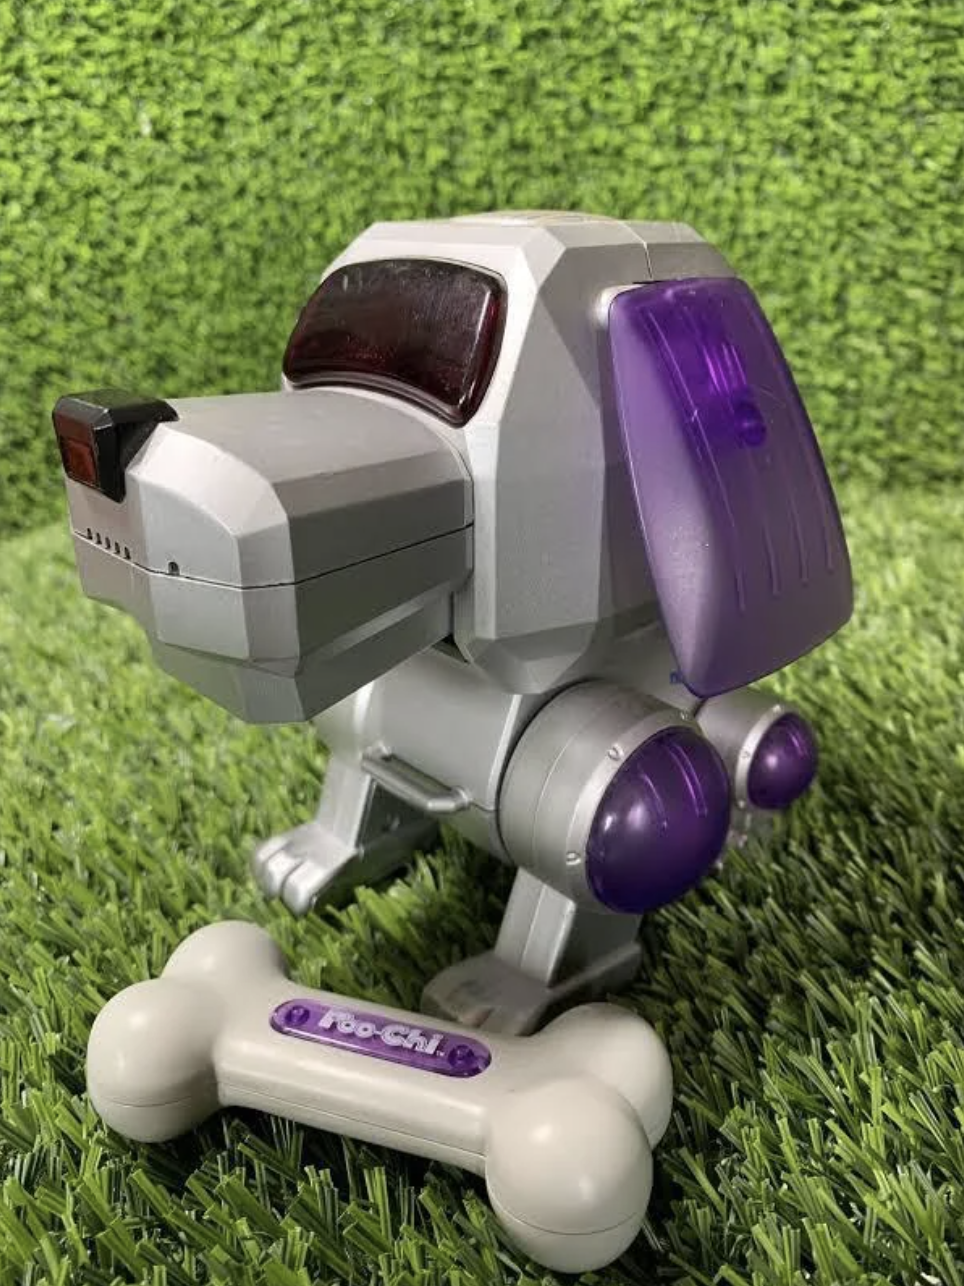 small robot toy dog